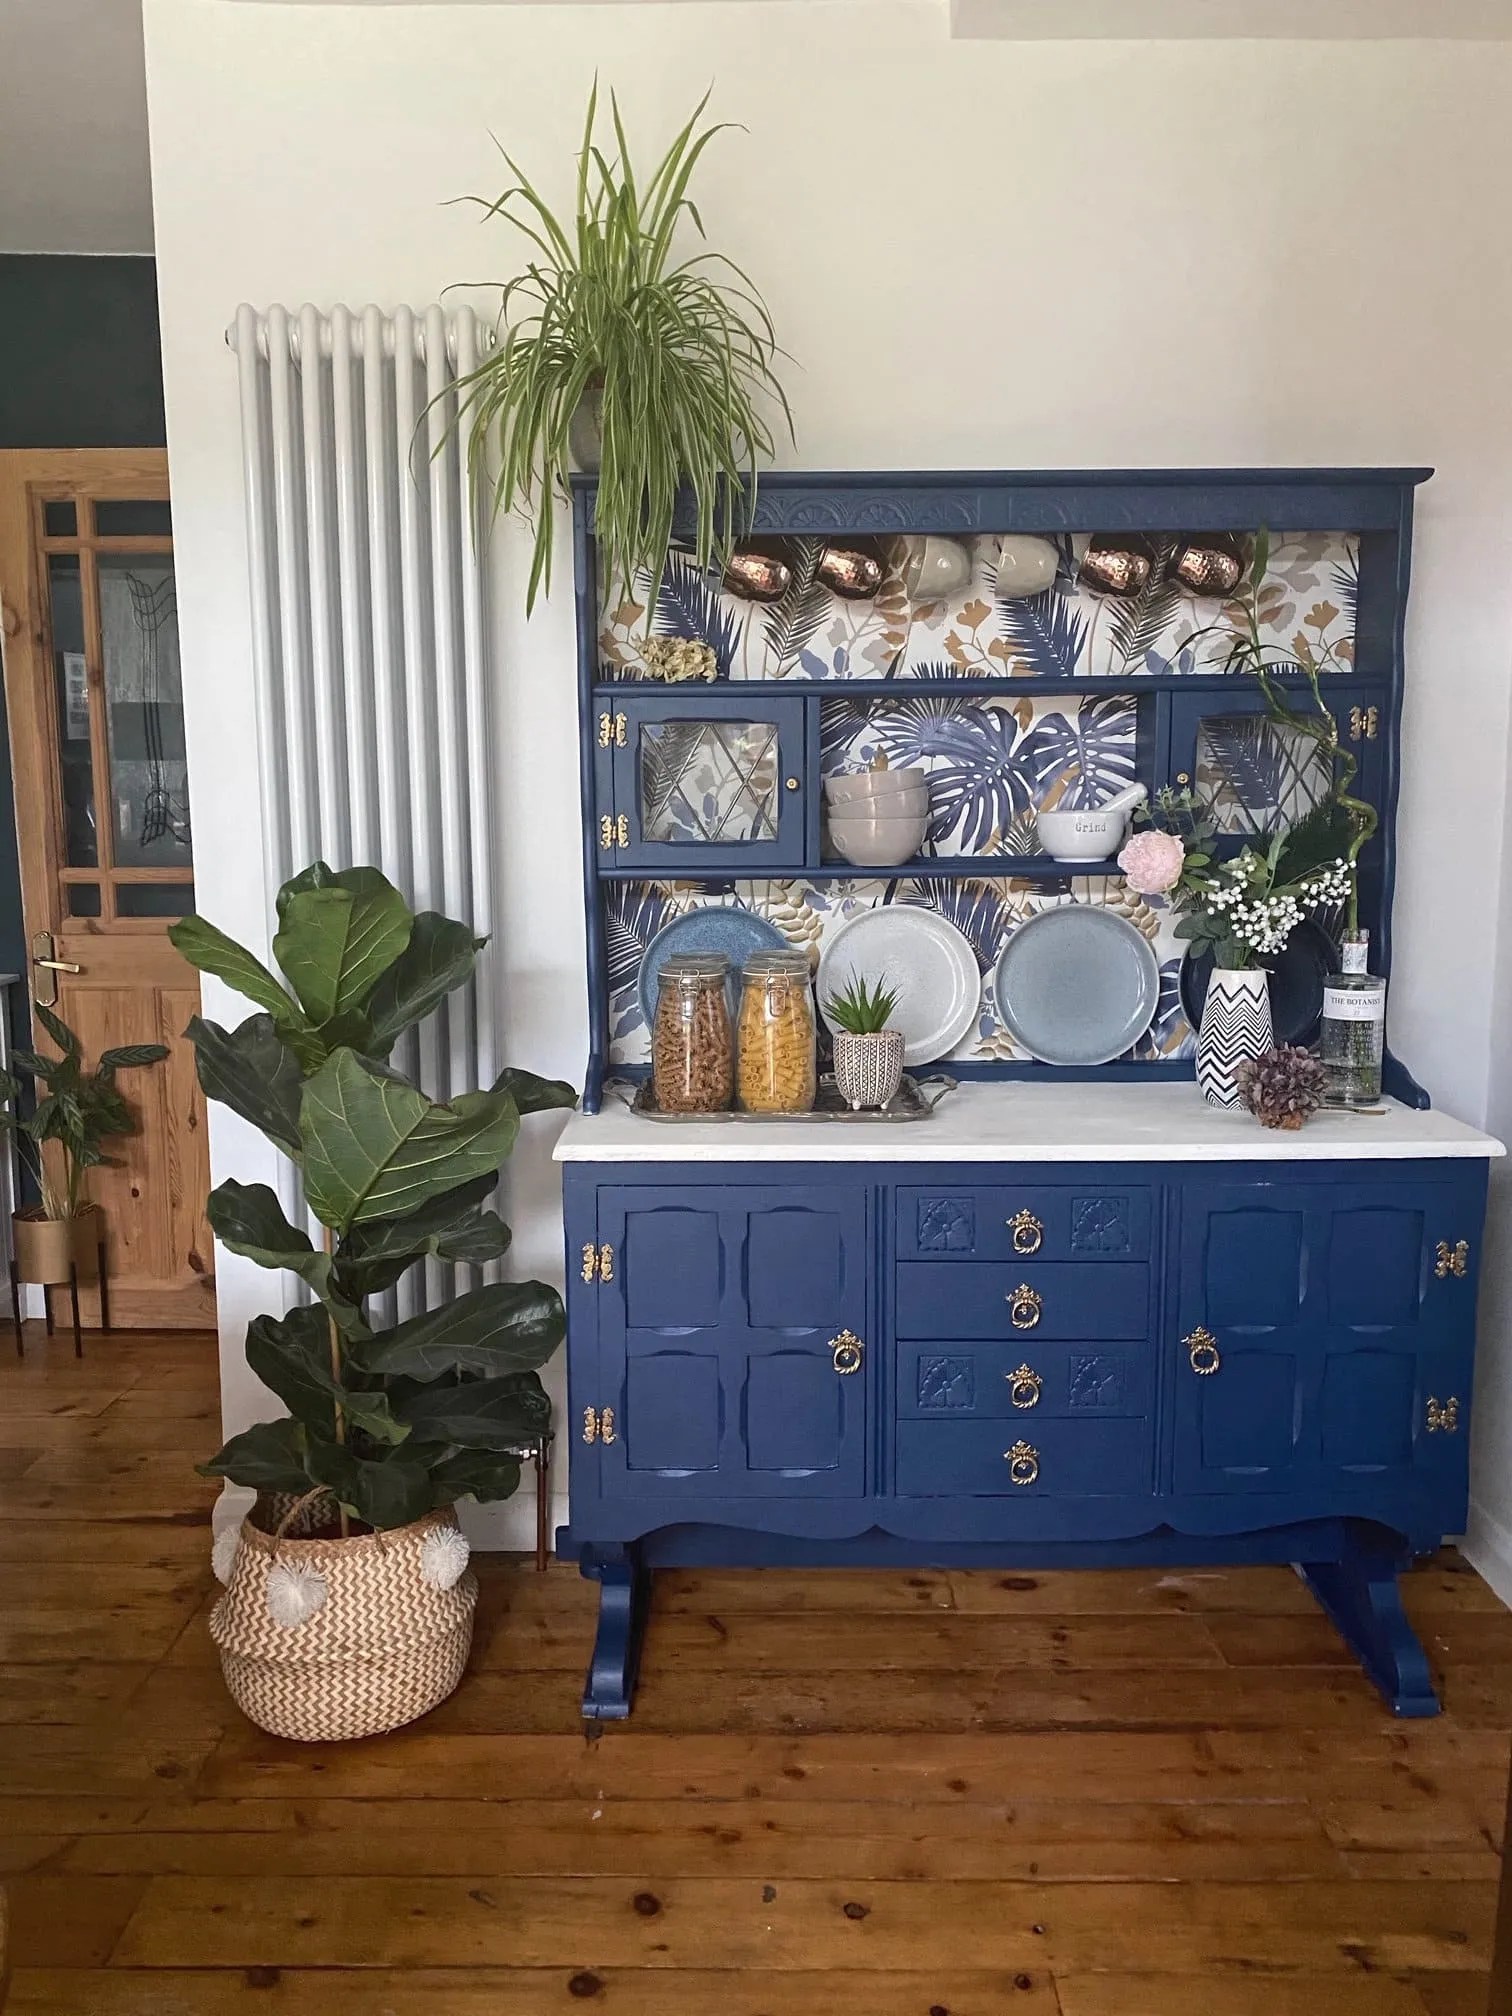 Upcycled Welsh Dresser – How to Transform with Paint and Wallpaper